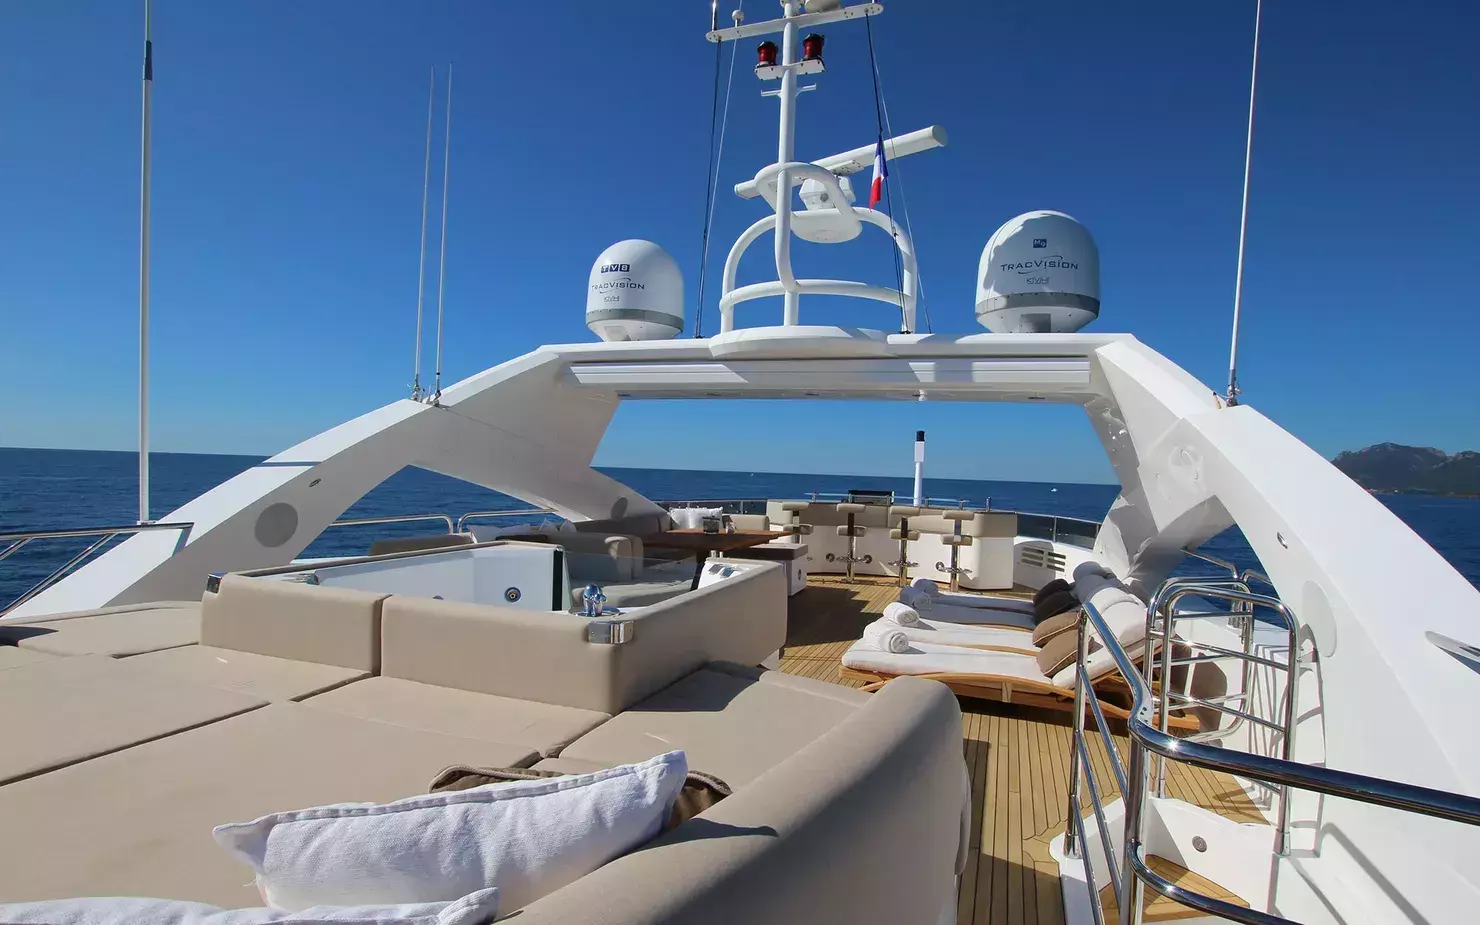 Lusia M by Sunseeker - Top rates for a Charter of a private Superyacht in Italy